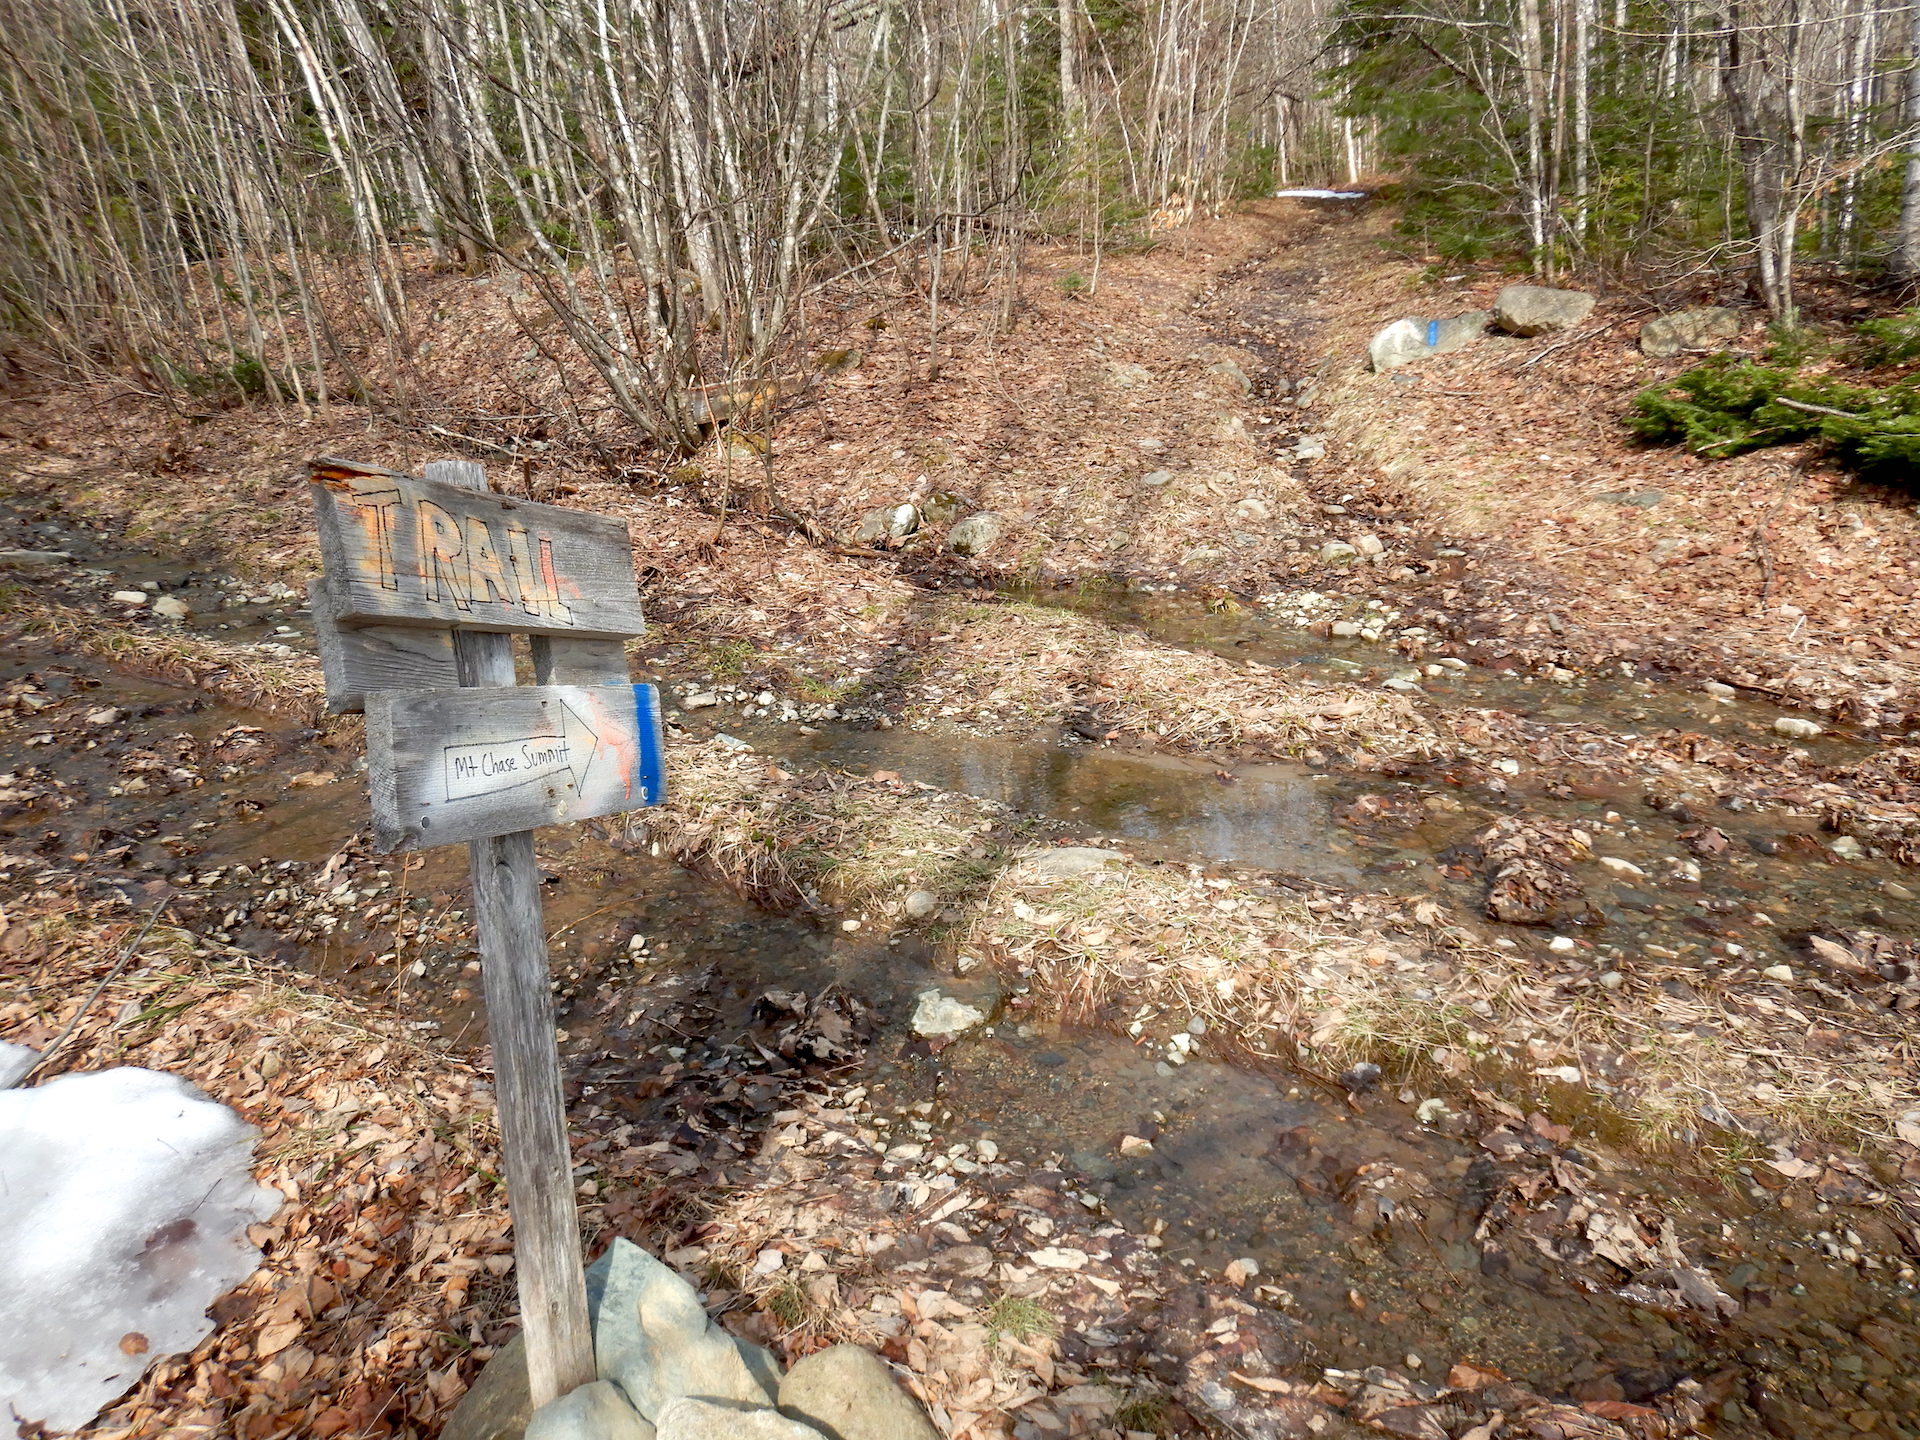 Two trails intersect at lower right. Both have water flowing on them. A sign at left points to the center of the photo. The sign is mounted on a post has a homemade look. It says "trail." An arrow points to the right toward the trail. Both "trail" and the arrow are outlined in permanent marker.